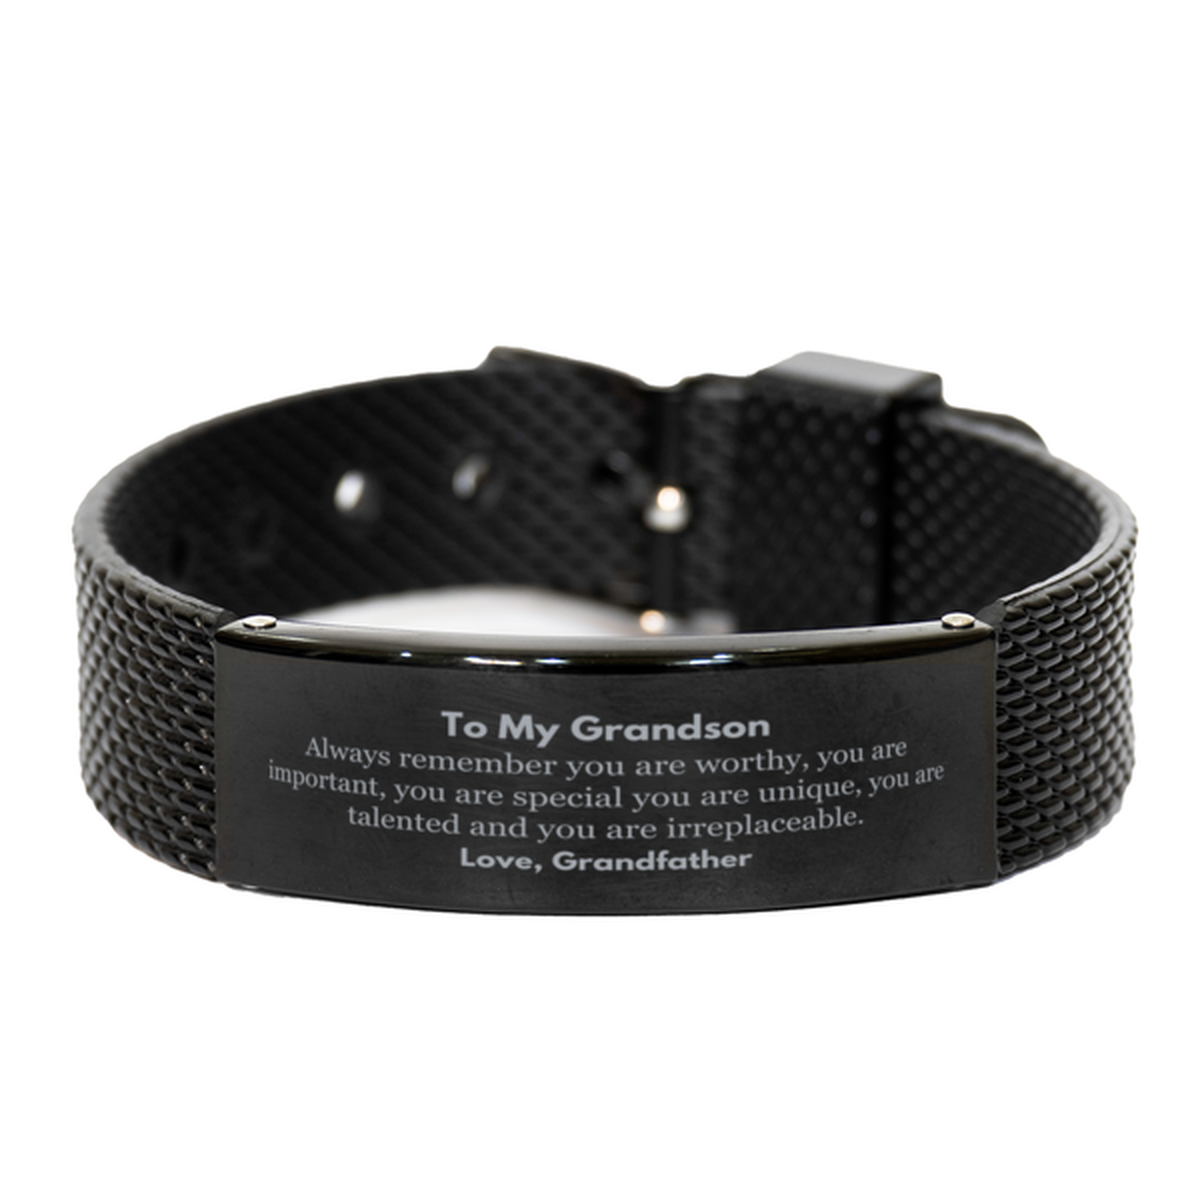 Grandson Birthday Gifts from Grandfather, Inspirational Black Shark Mesh Bracelet for Grandson Christmas Graduation Gifts for Grandson Always remember you are worthy, you are important. Love, Grandfather